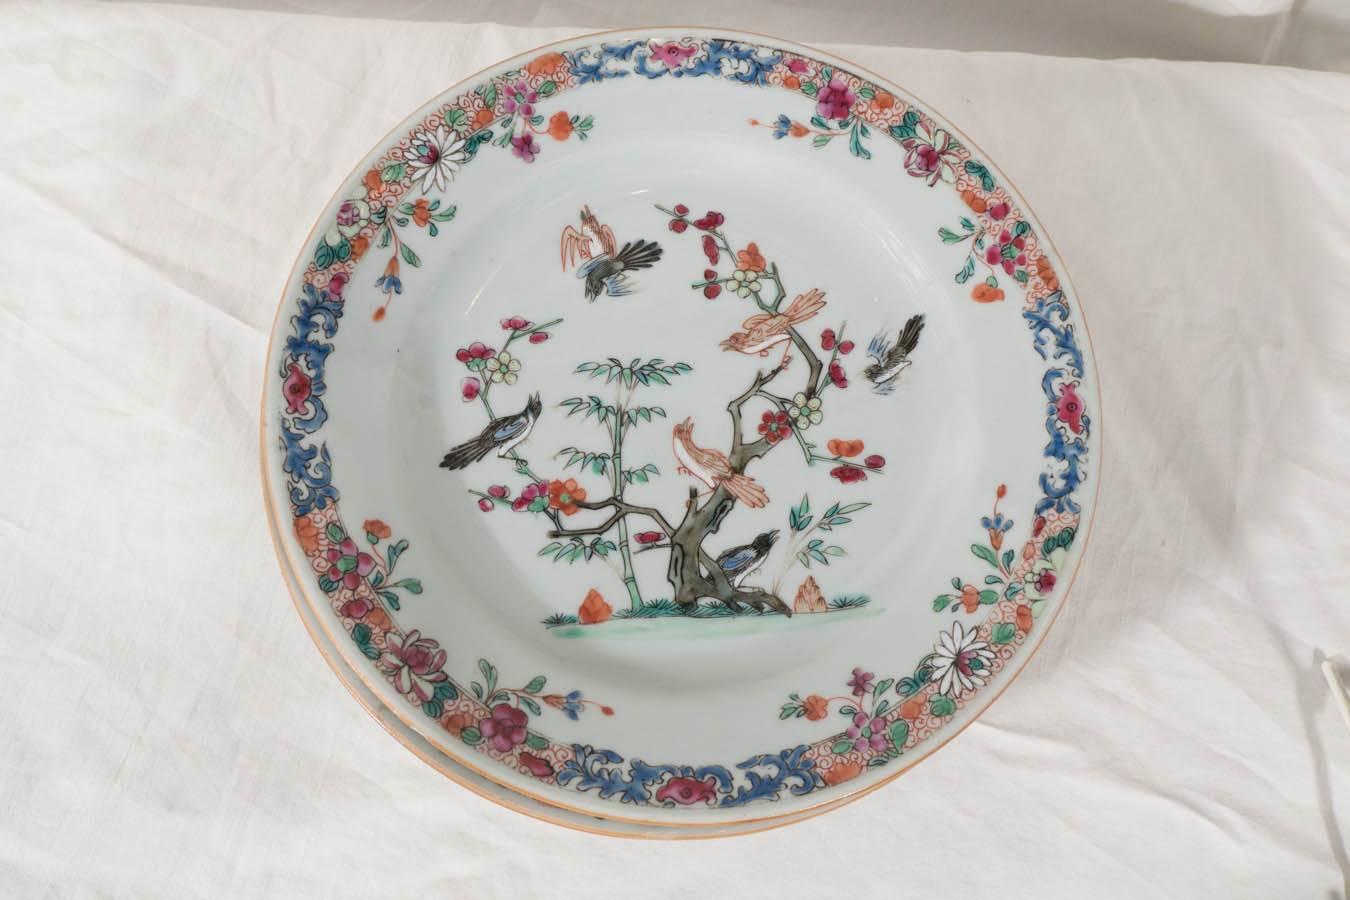 Qing Antique Chinese Porcelain Dishes Symbolizing Youth Beauty and Good Fortune